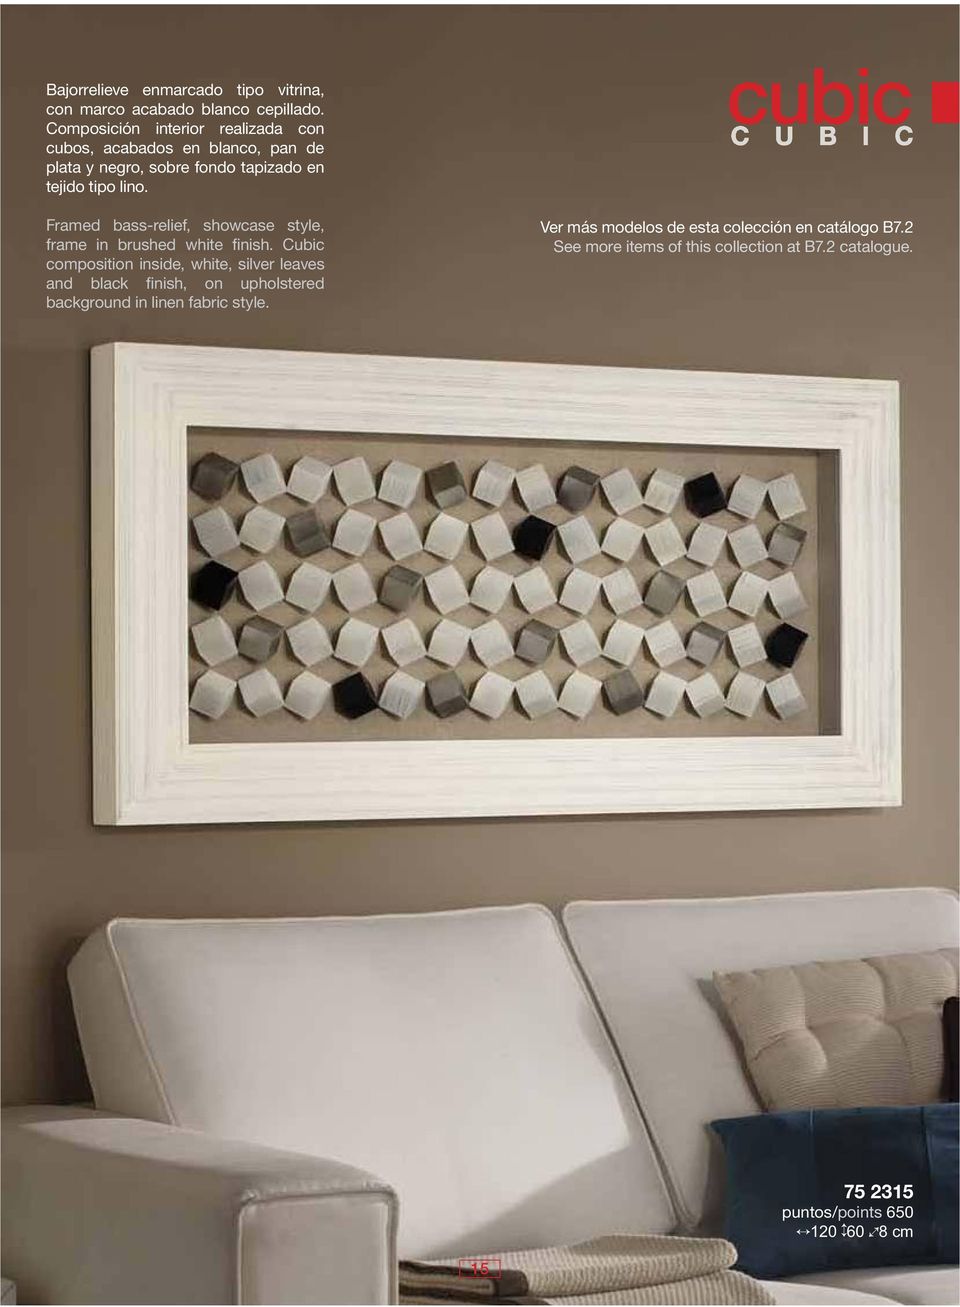 Framed bass-relief, showcase style, frame in brushed white finish.